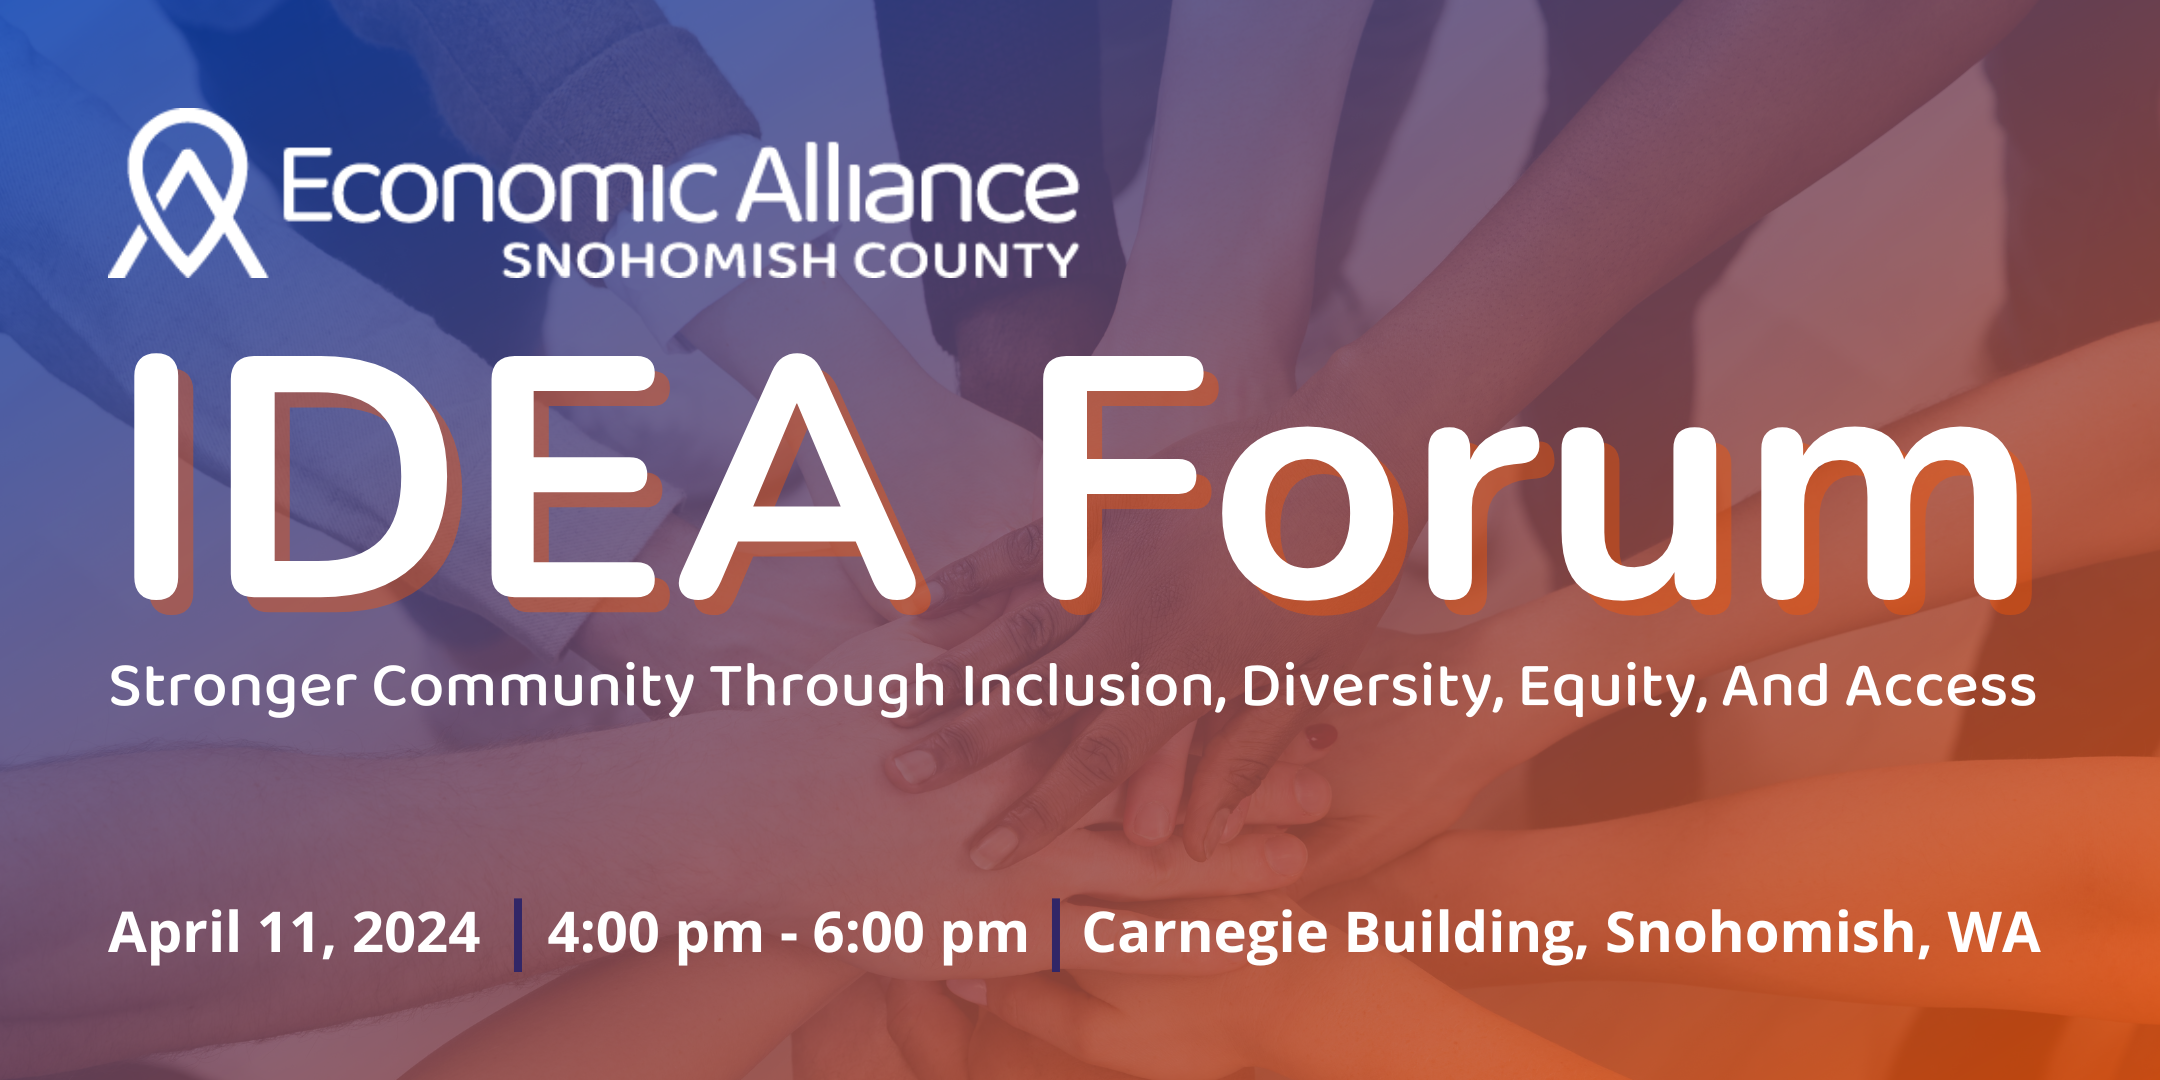 IDEA Forum (Inclusion, Diversity, Equity, Accessibility) Photo - Click Here to See